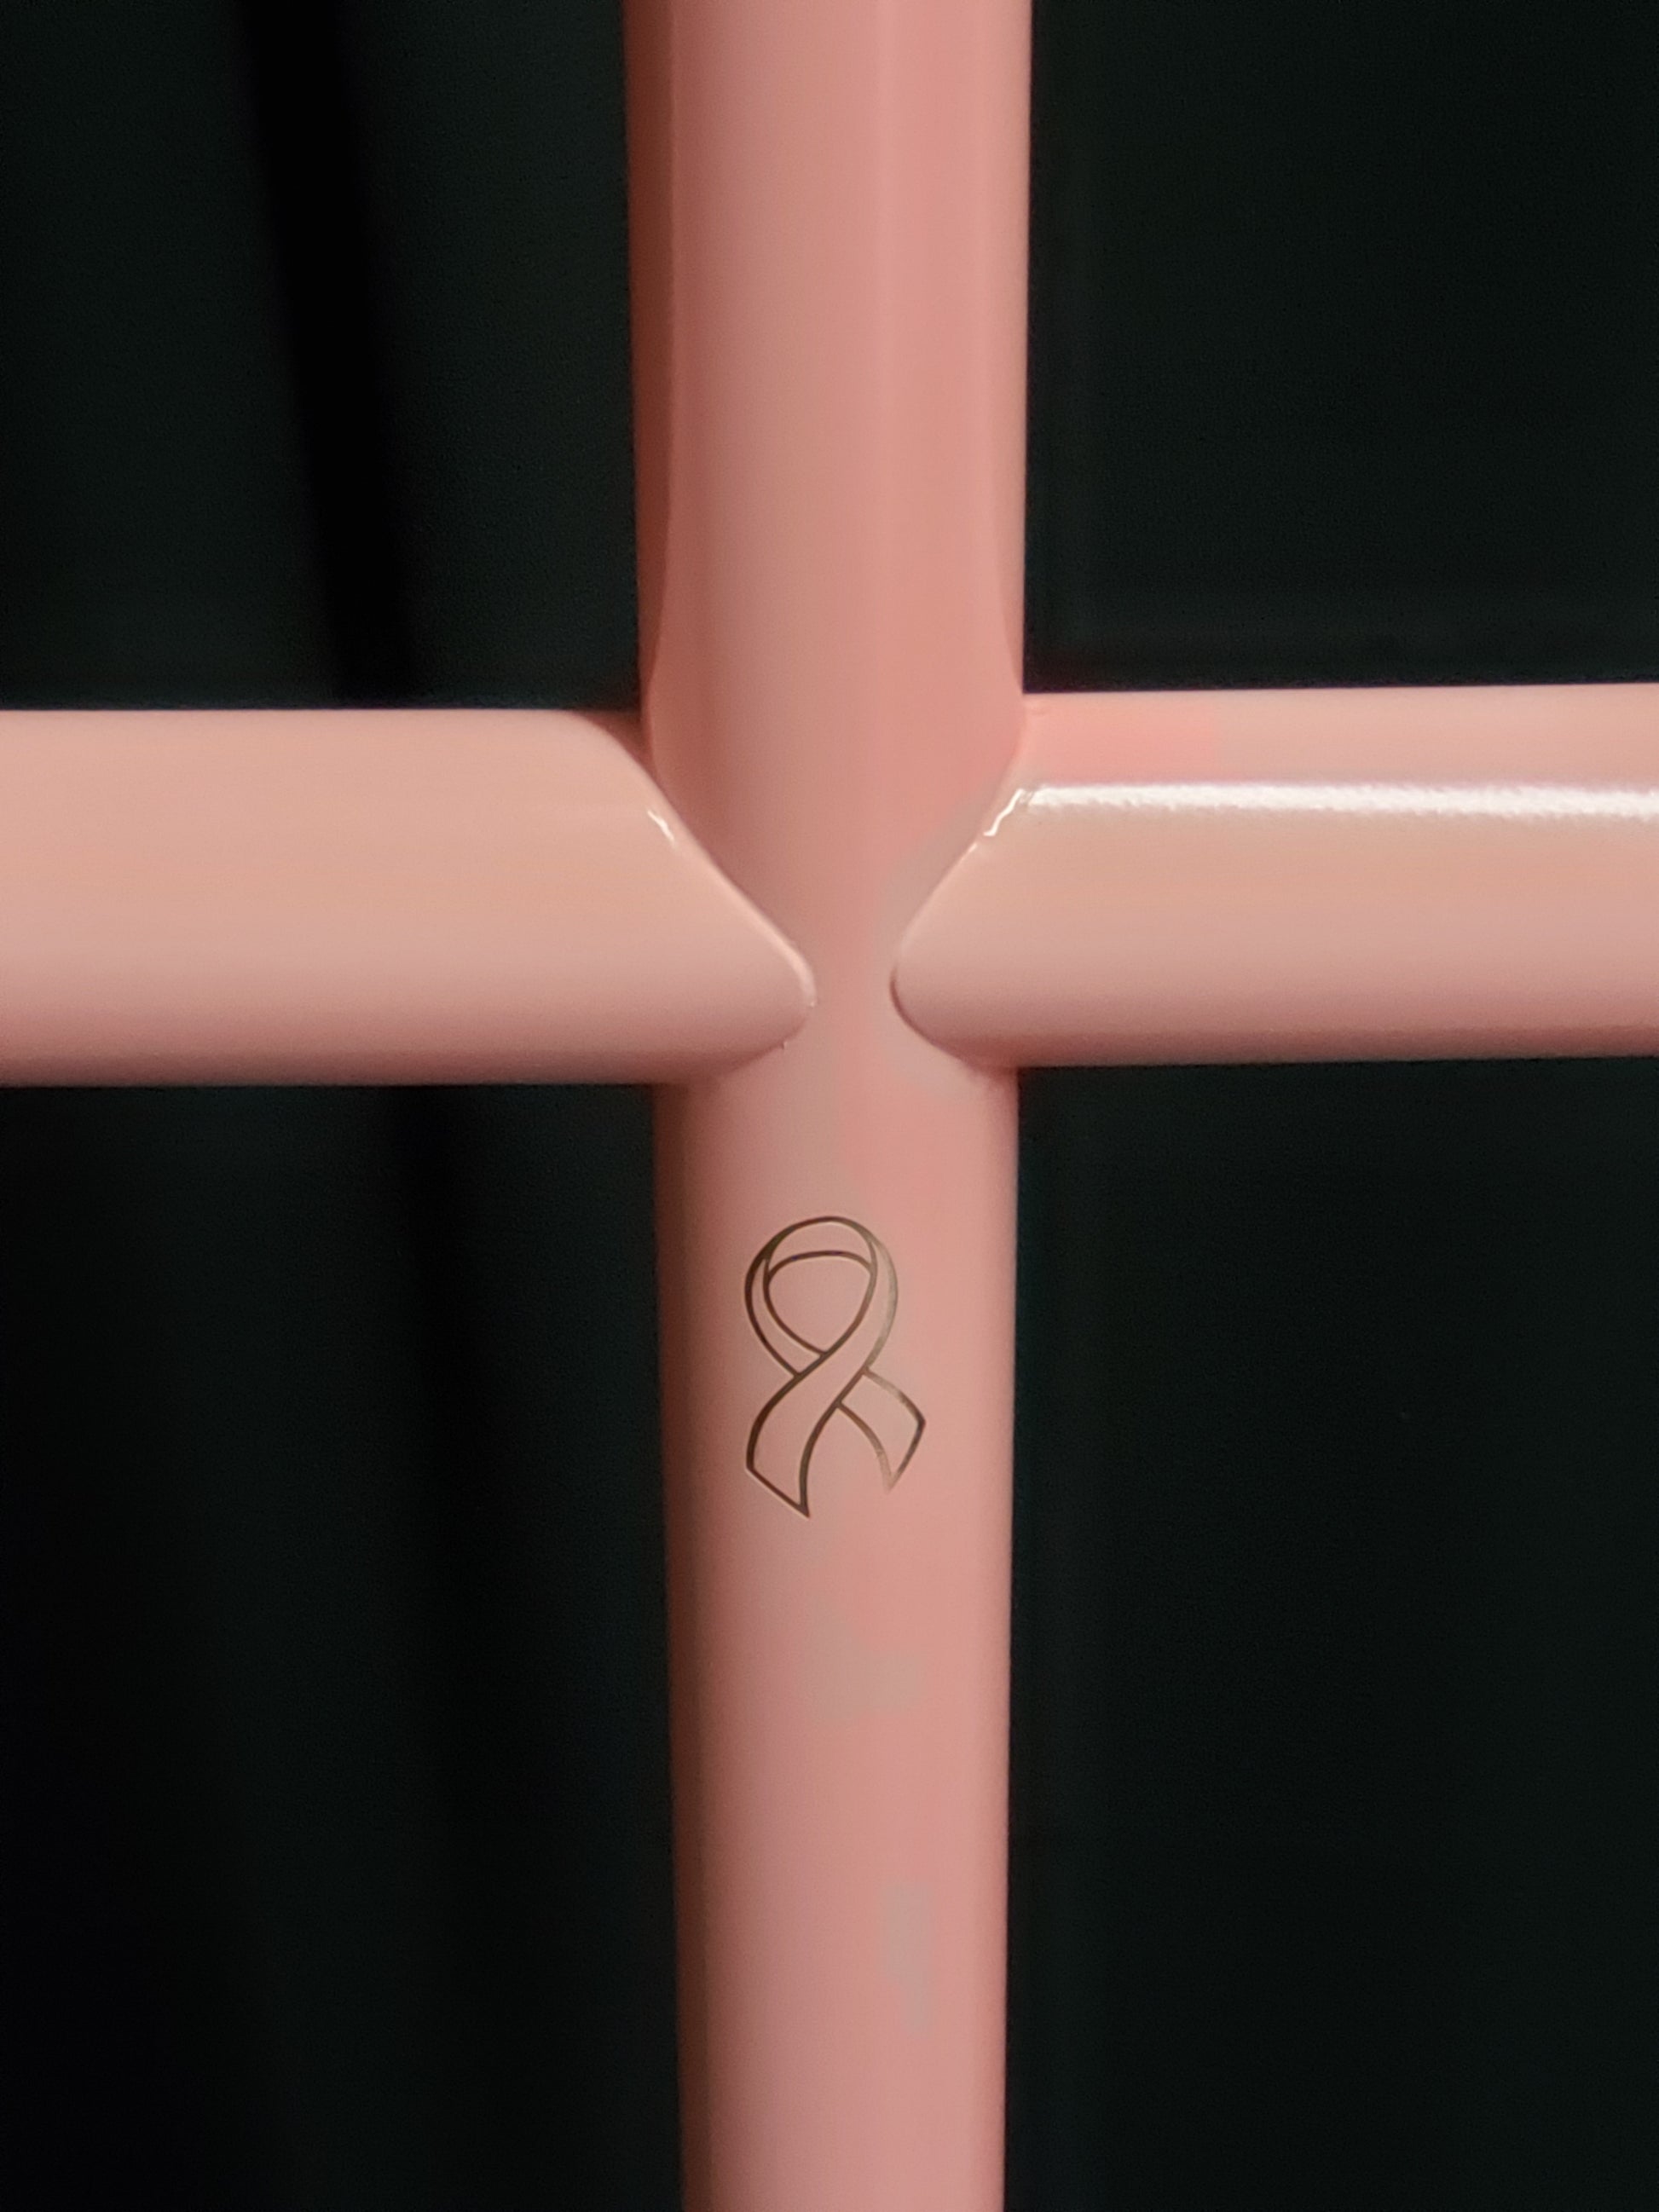 Everlasting Cross Memorial With The Breast Cancer Ribbon Remembers Her Strength And Fight. Our Loved One Lost And Memories Shared Are Forever Timeless And Engraved Uniquely. USA Manufactured In Stainless Steel Will Be Timeless At Gravestone, Garden, Favorite Place